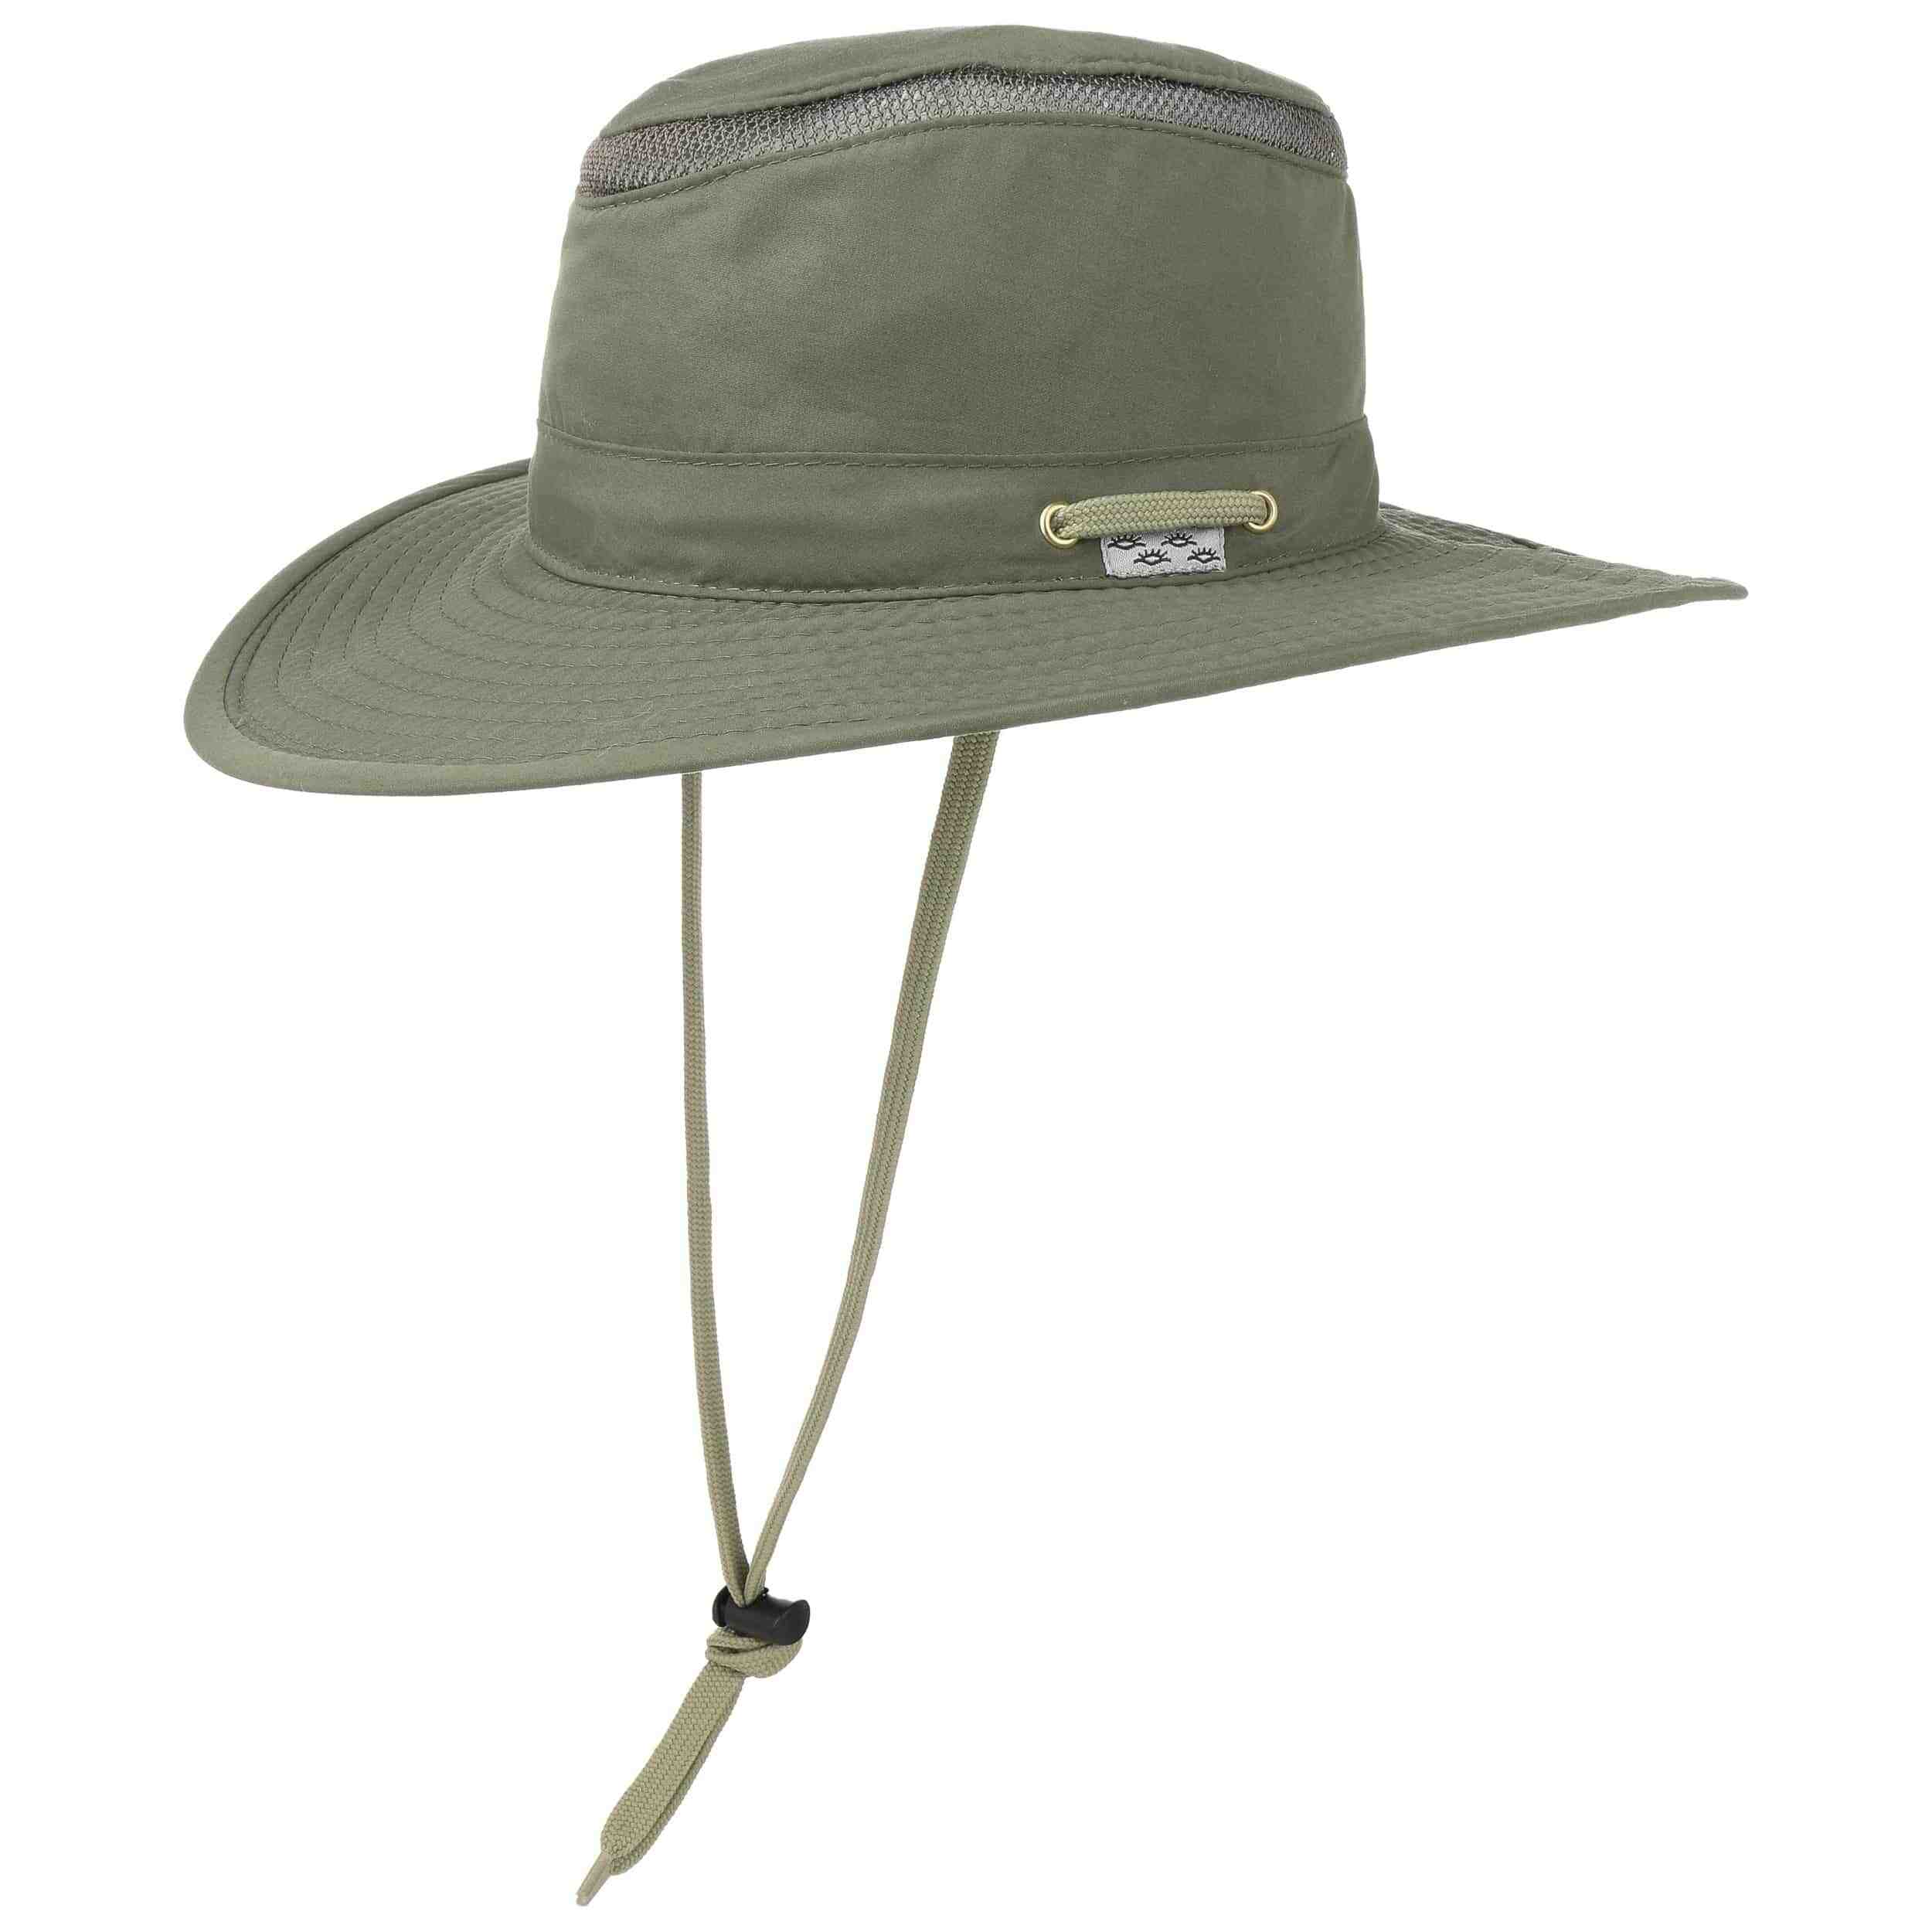 How do you tell if a hat has a cardboard or plastic?